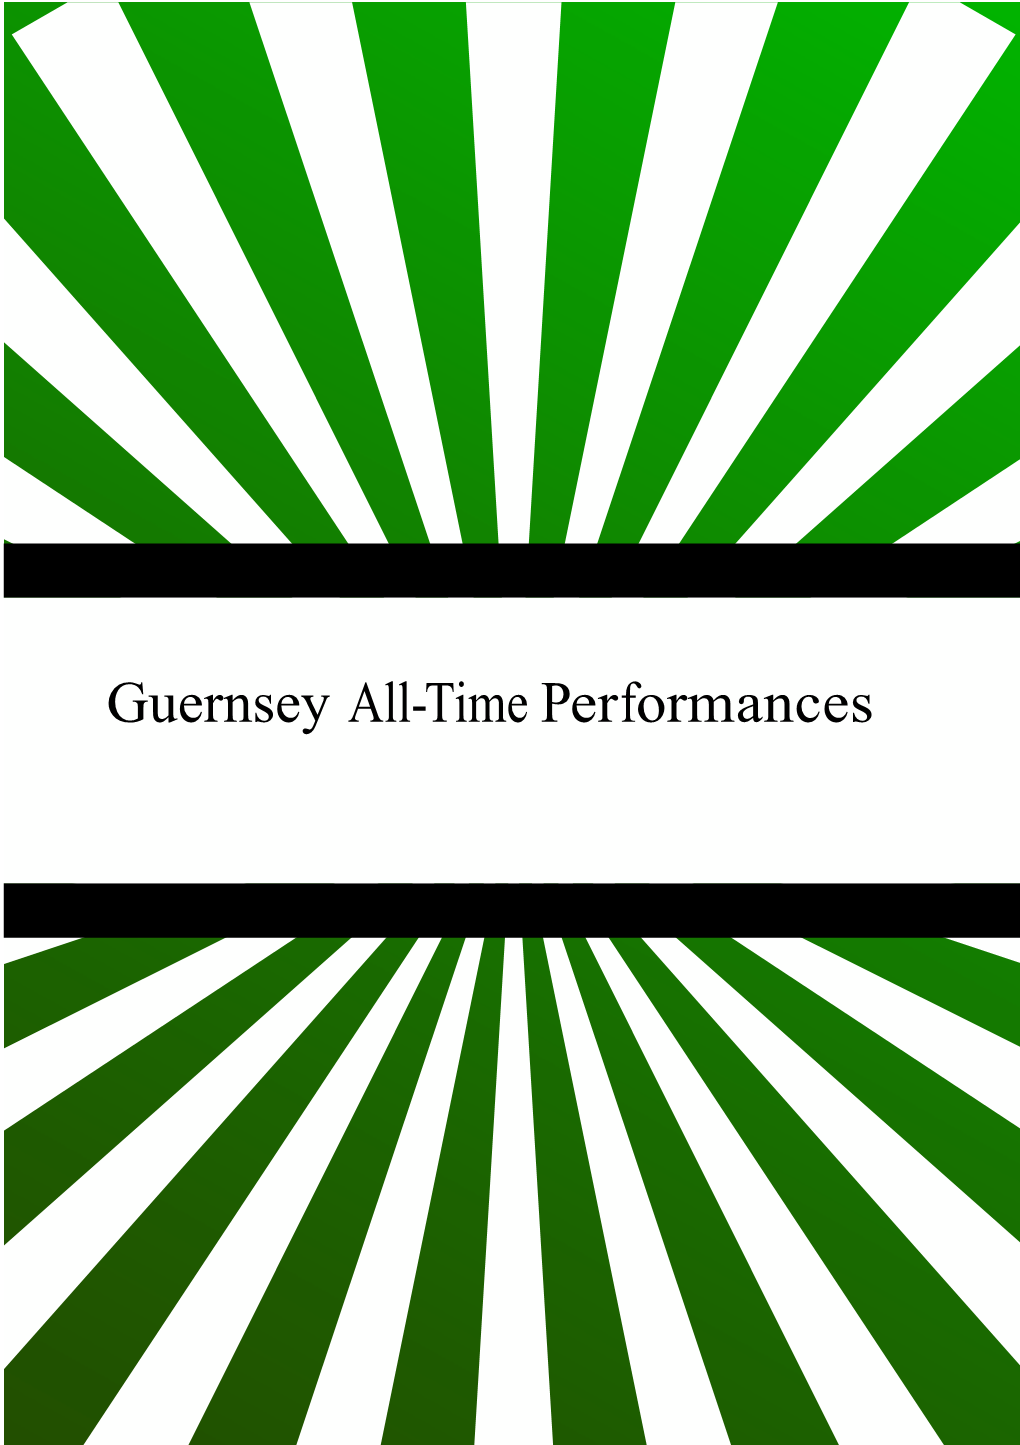 Guernsey All-Time Performances